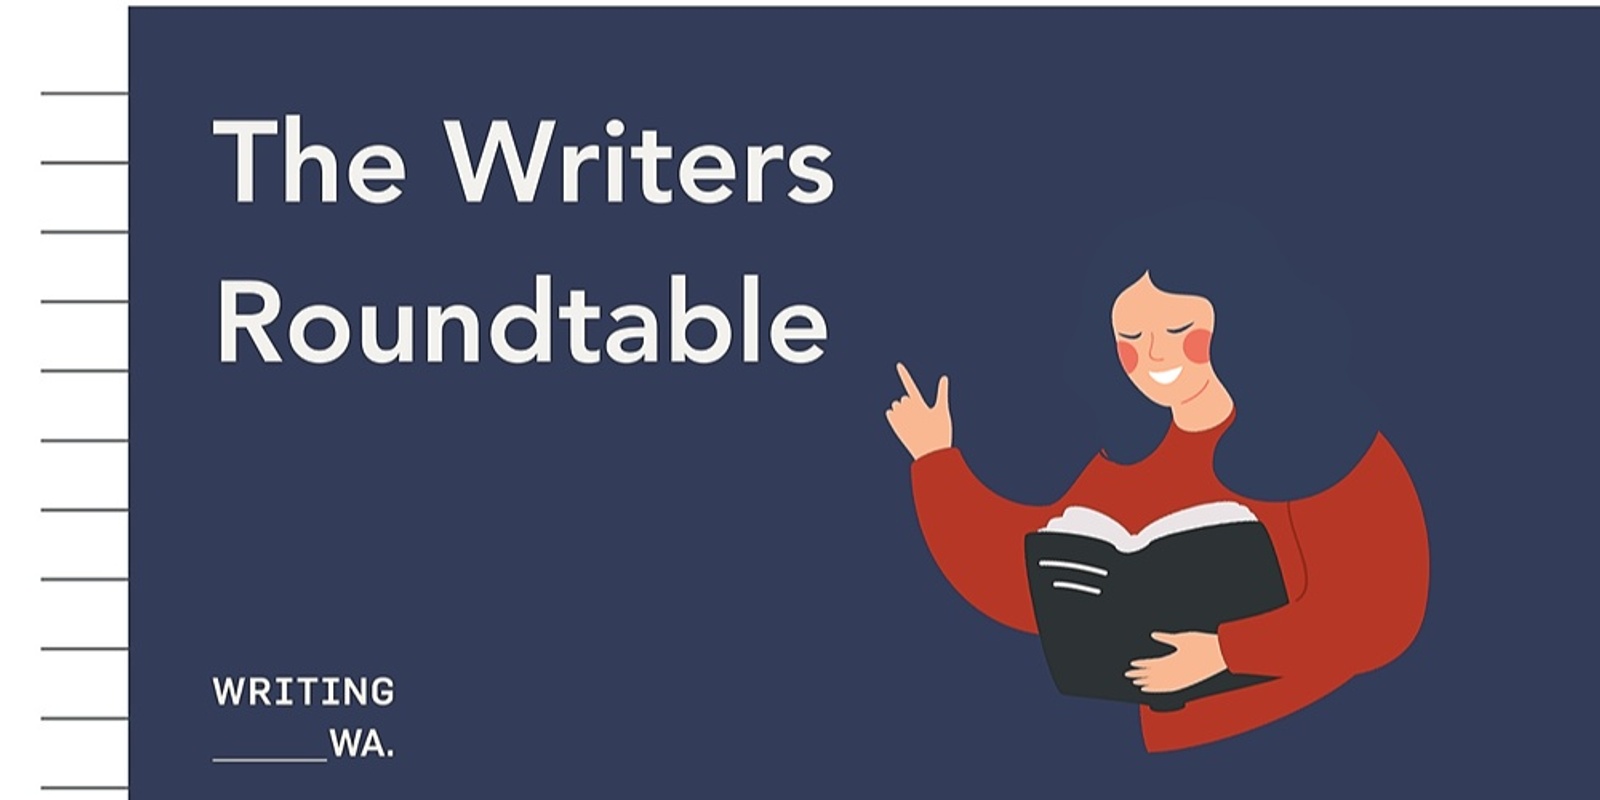 Banner image for The Writers Roundtable